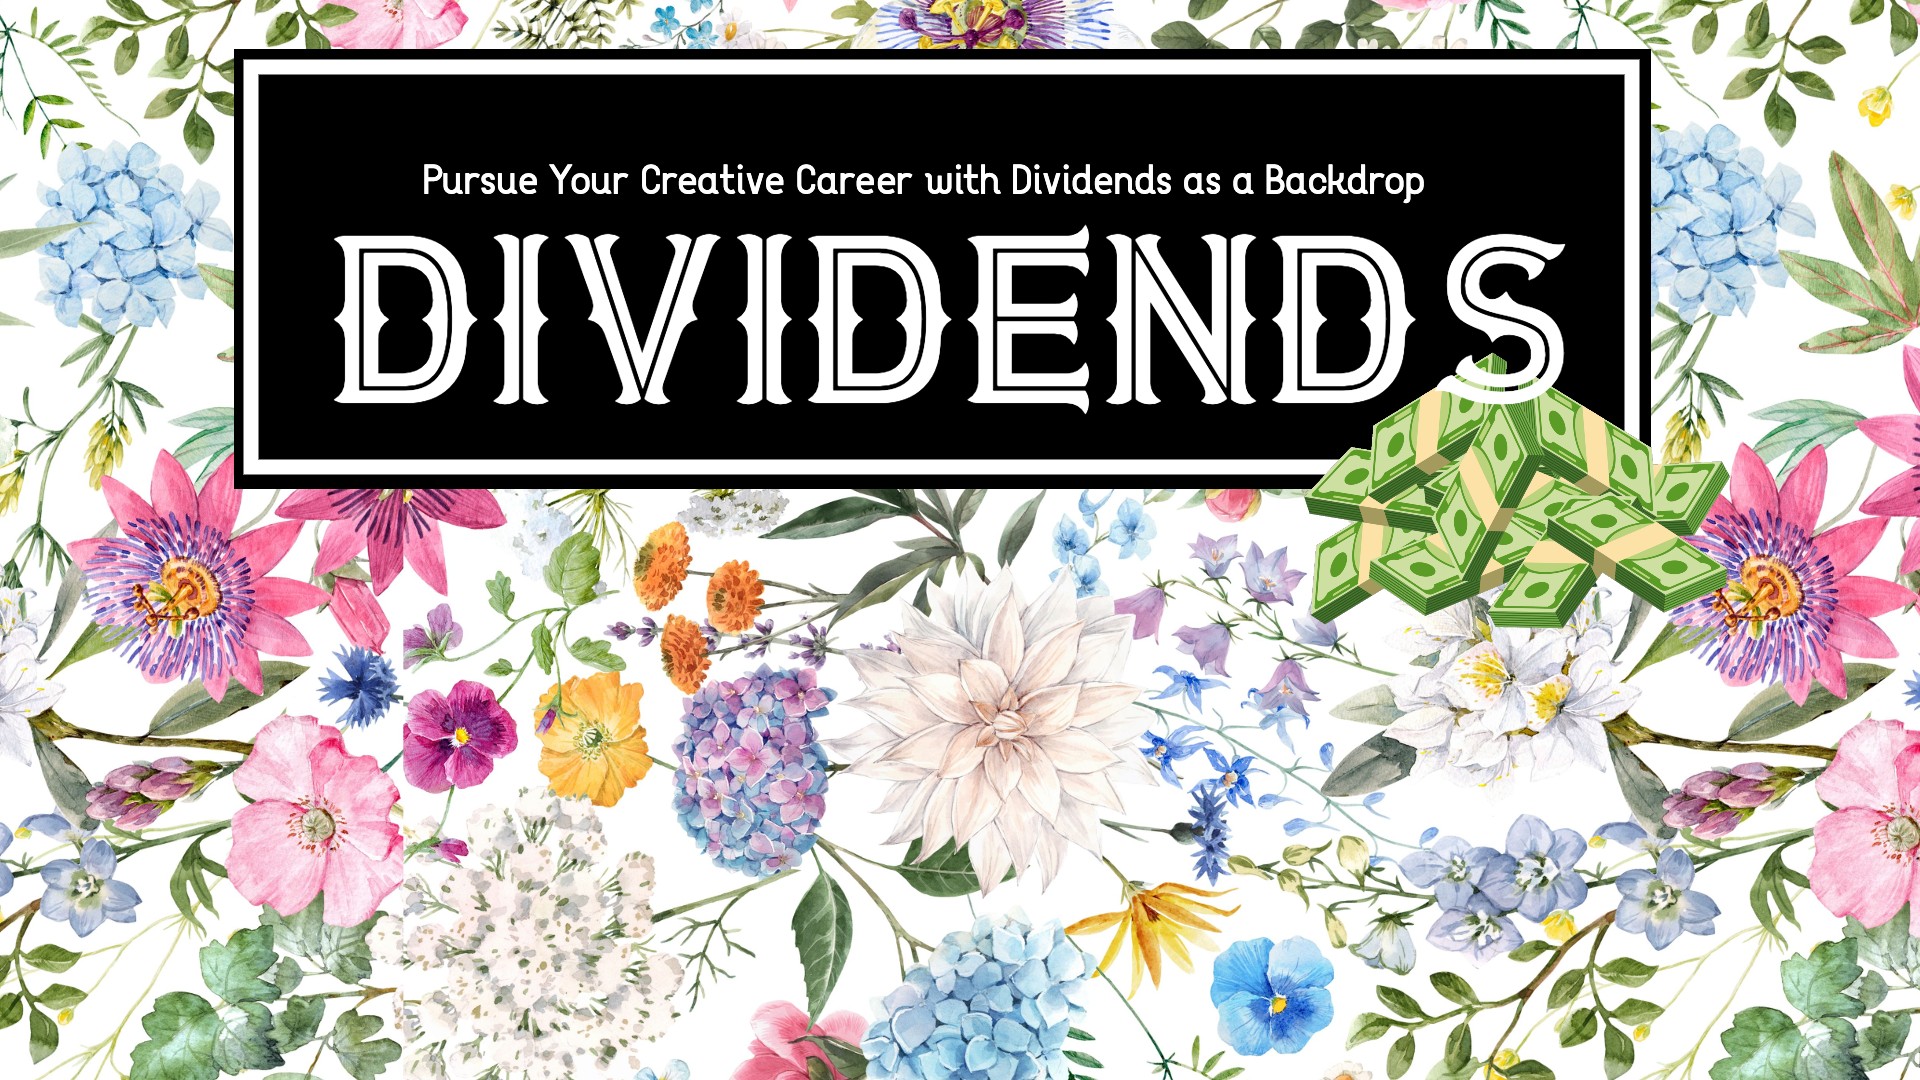 Pursue Your Creative Career with Dividends